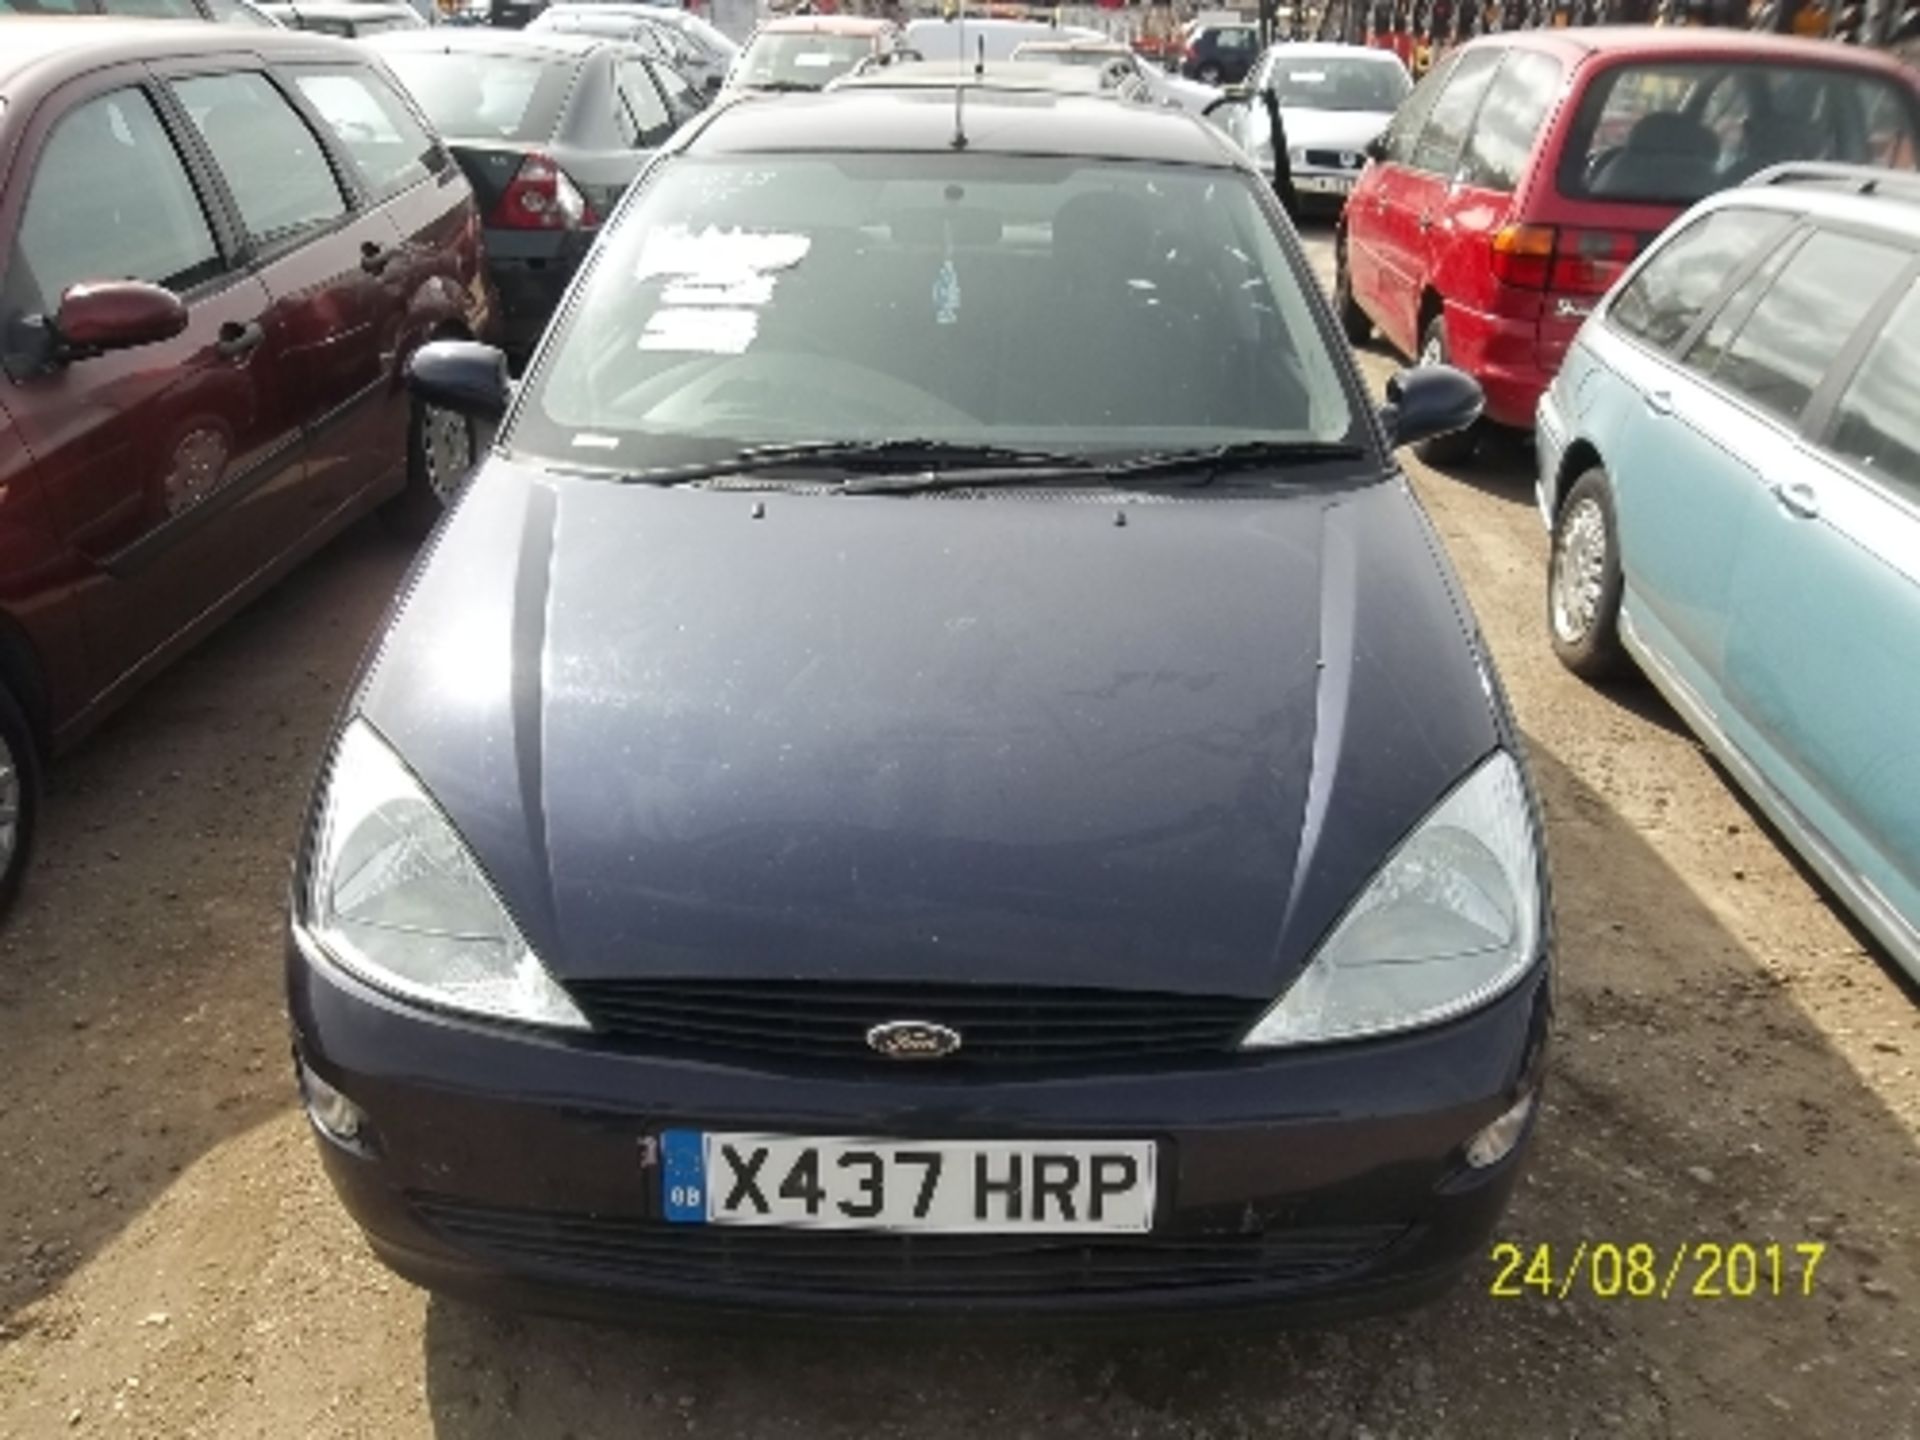 Ford Focus CL - X437 HRP Date of registration: 04.01.2001 1388cc, petrol, manual, blue Odometer